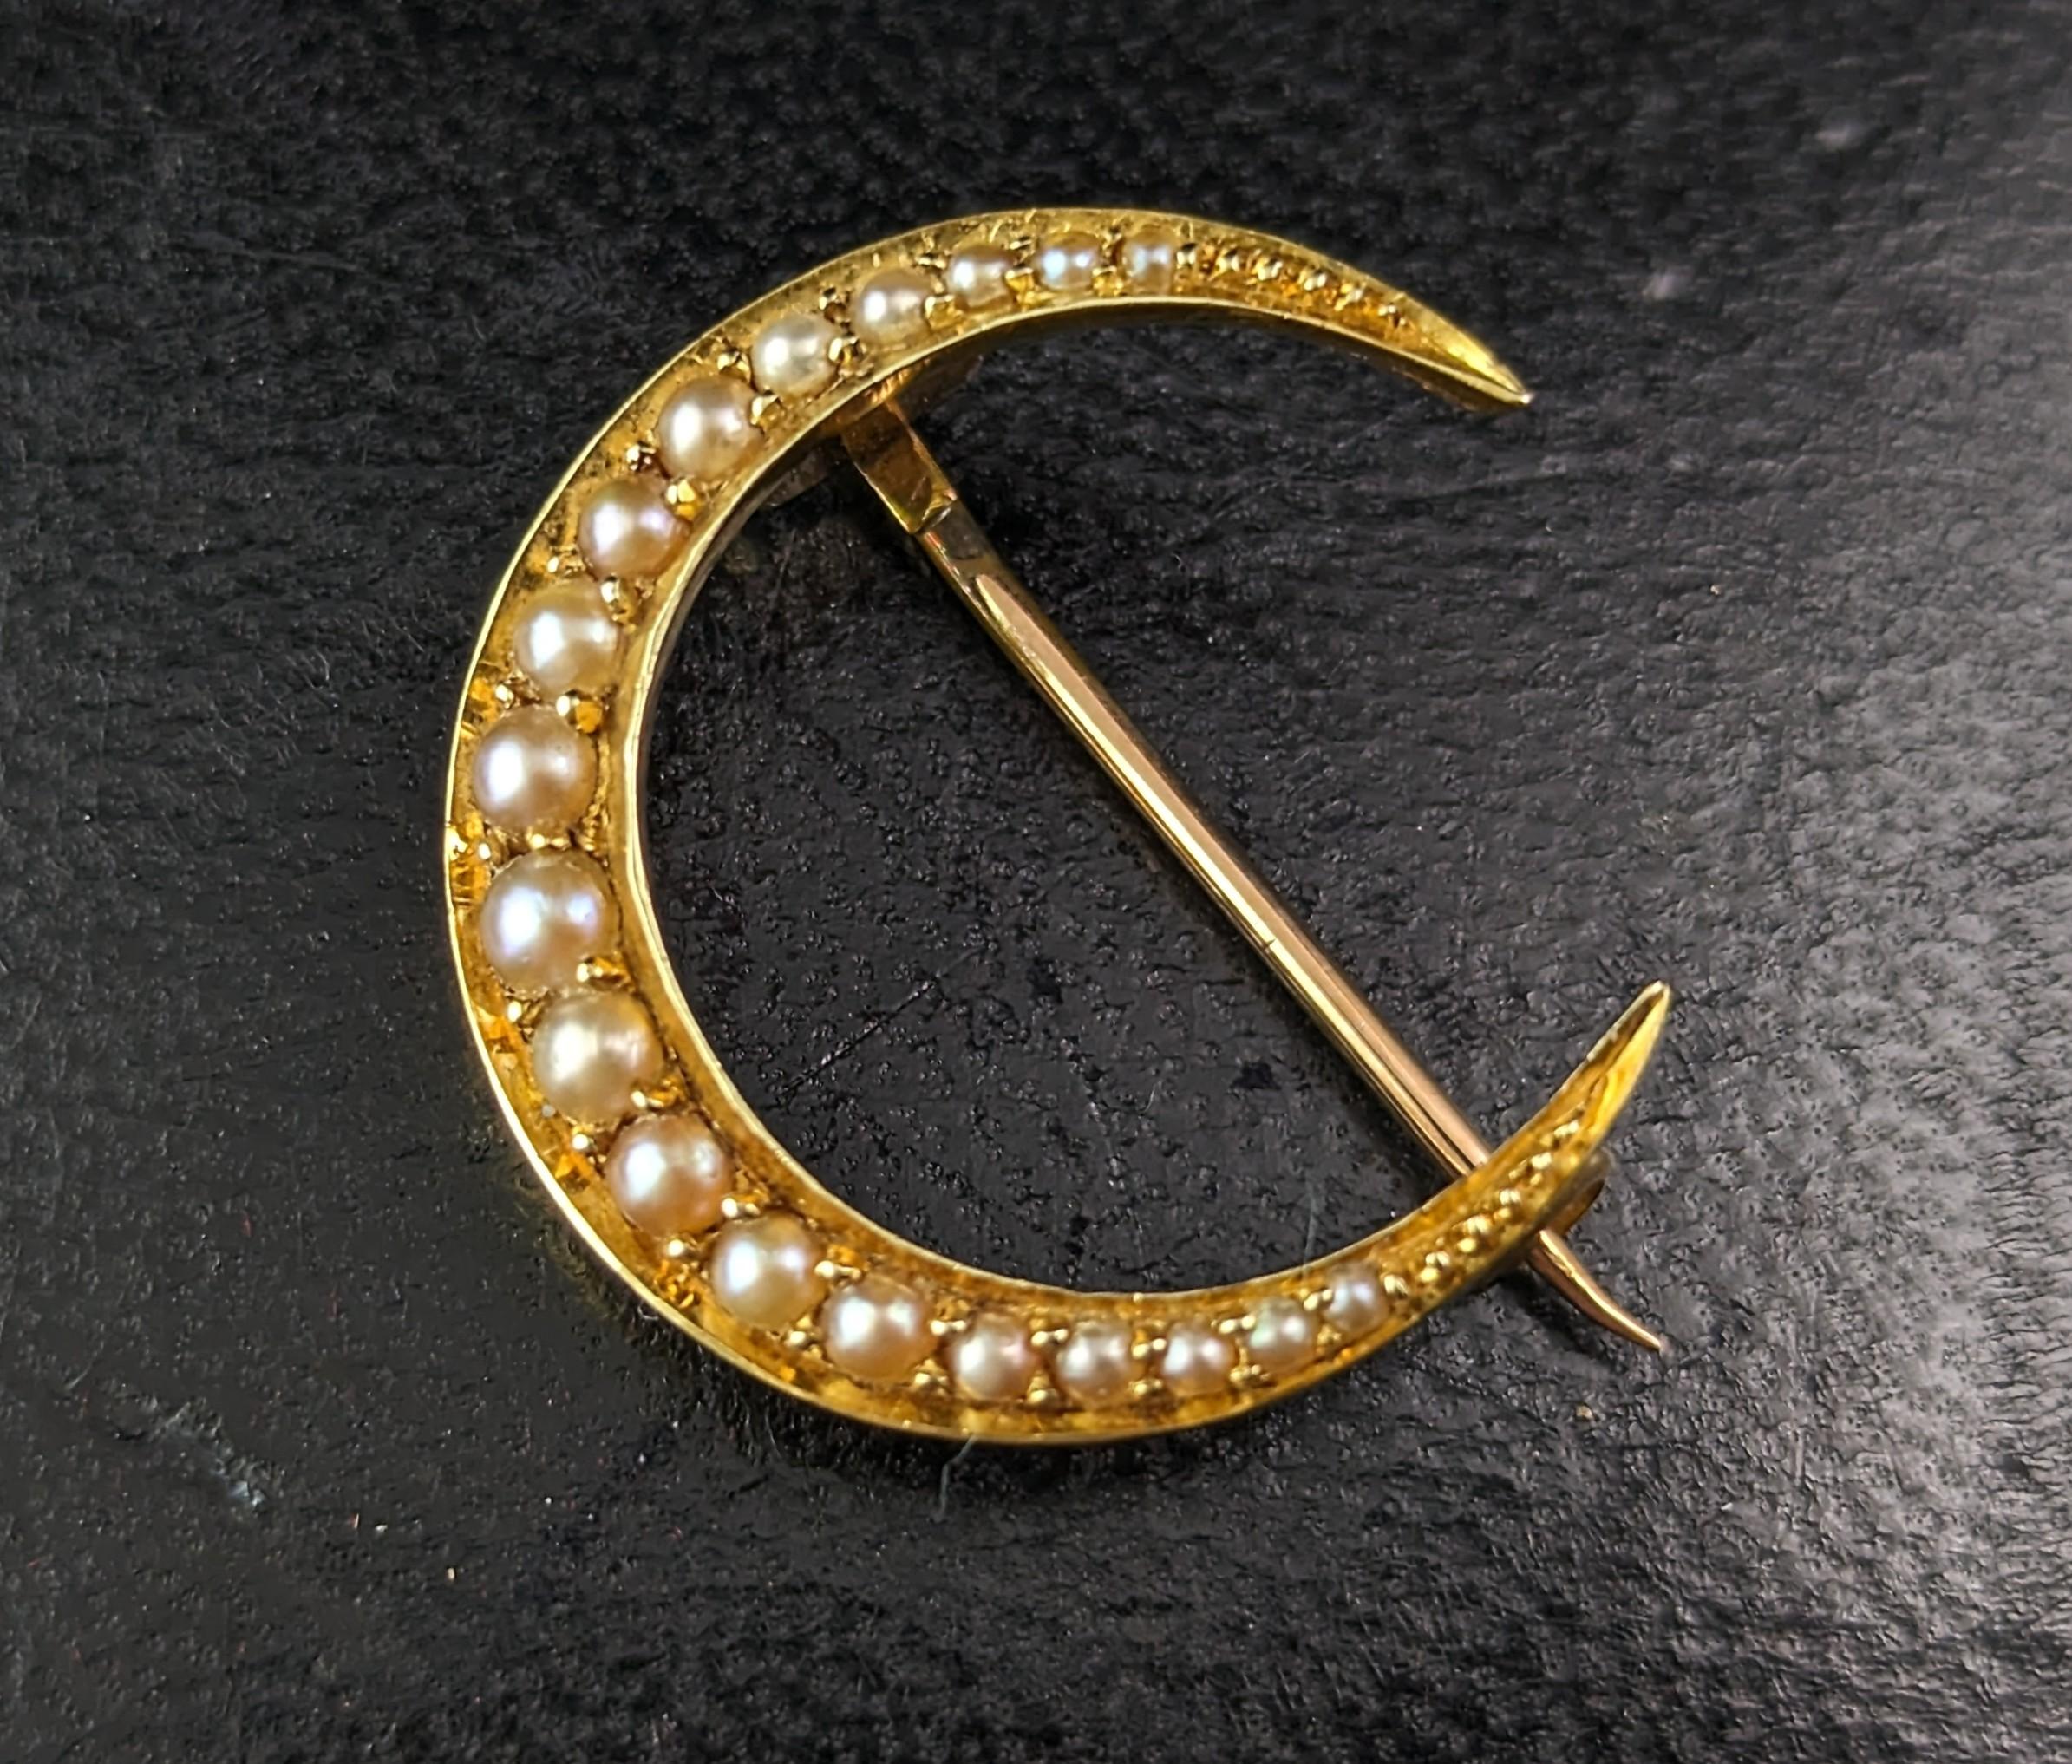 A gorgeous antique, late Victorian, 15ct gold and pearl crescent brooch.

A beautiful closed crescent in very rich bloomed 15ct yellow gold, it is set with creamy pearls that graduate from the ends to centre.

Crescent moons were a popular motif in